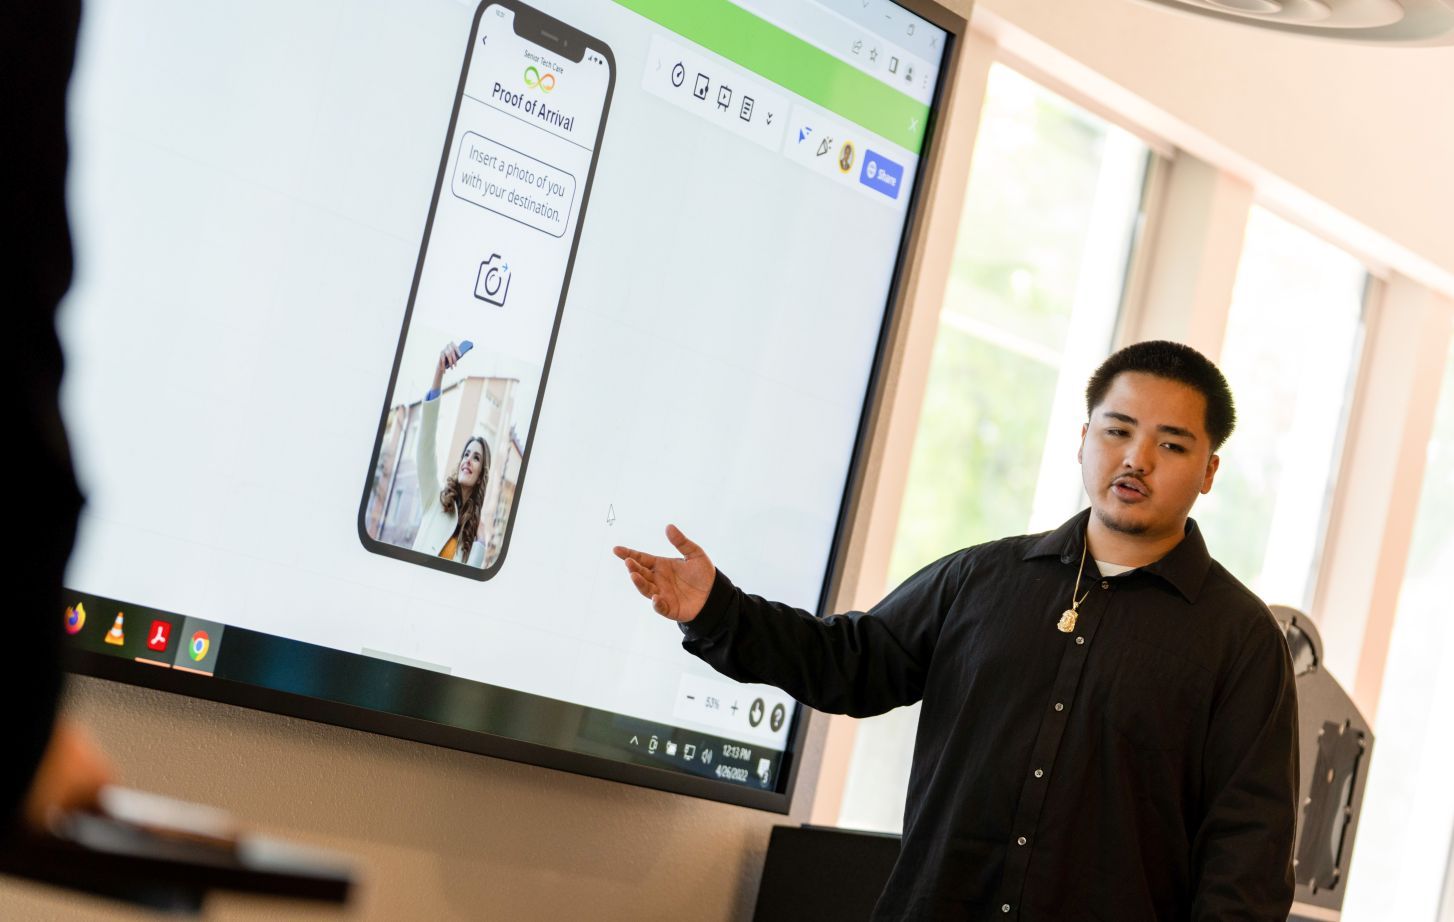 A student stands next to a projection screen with an app displayed